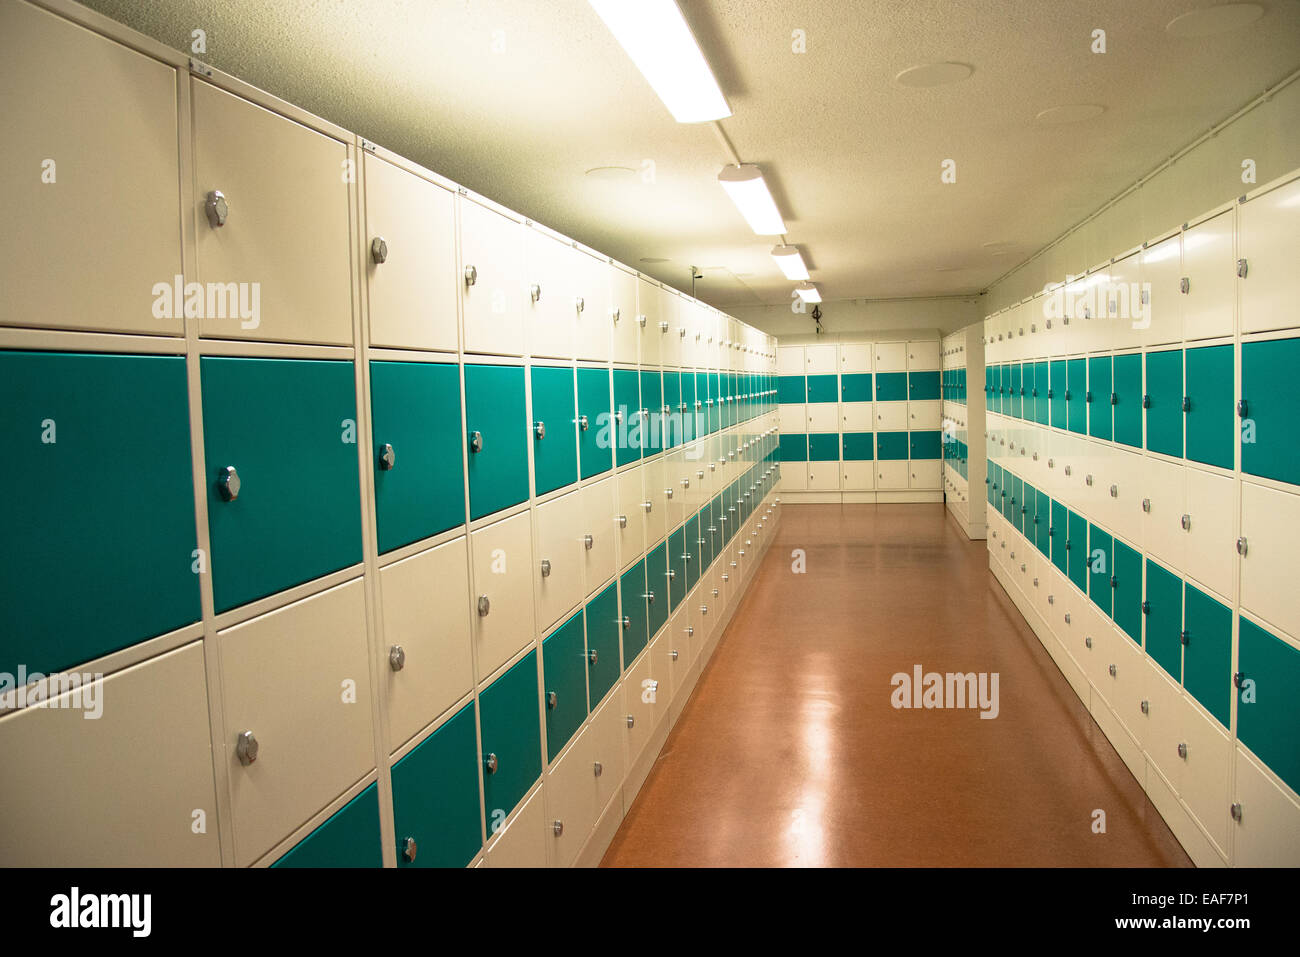 rows of automatic lockers at school Stock Photo